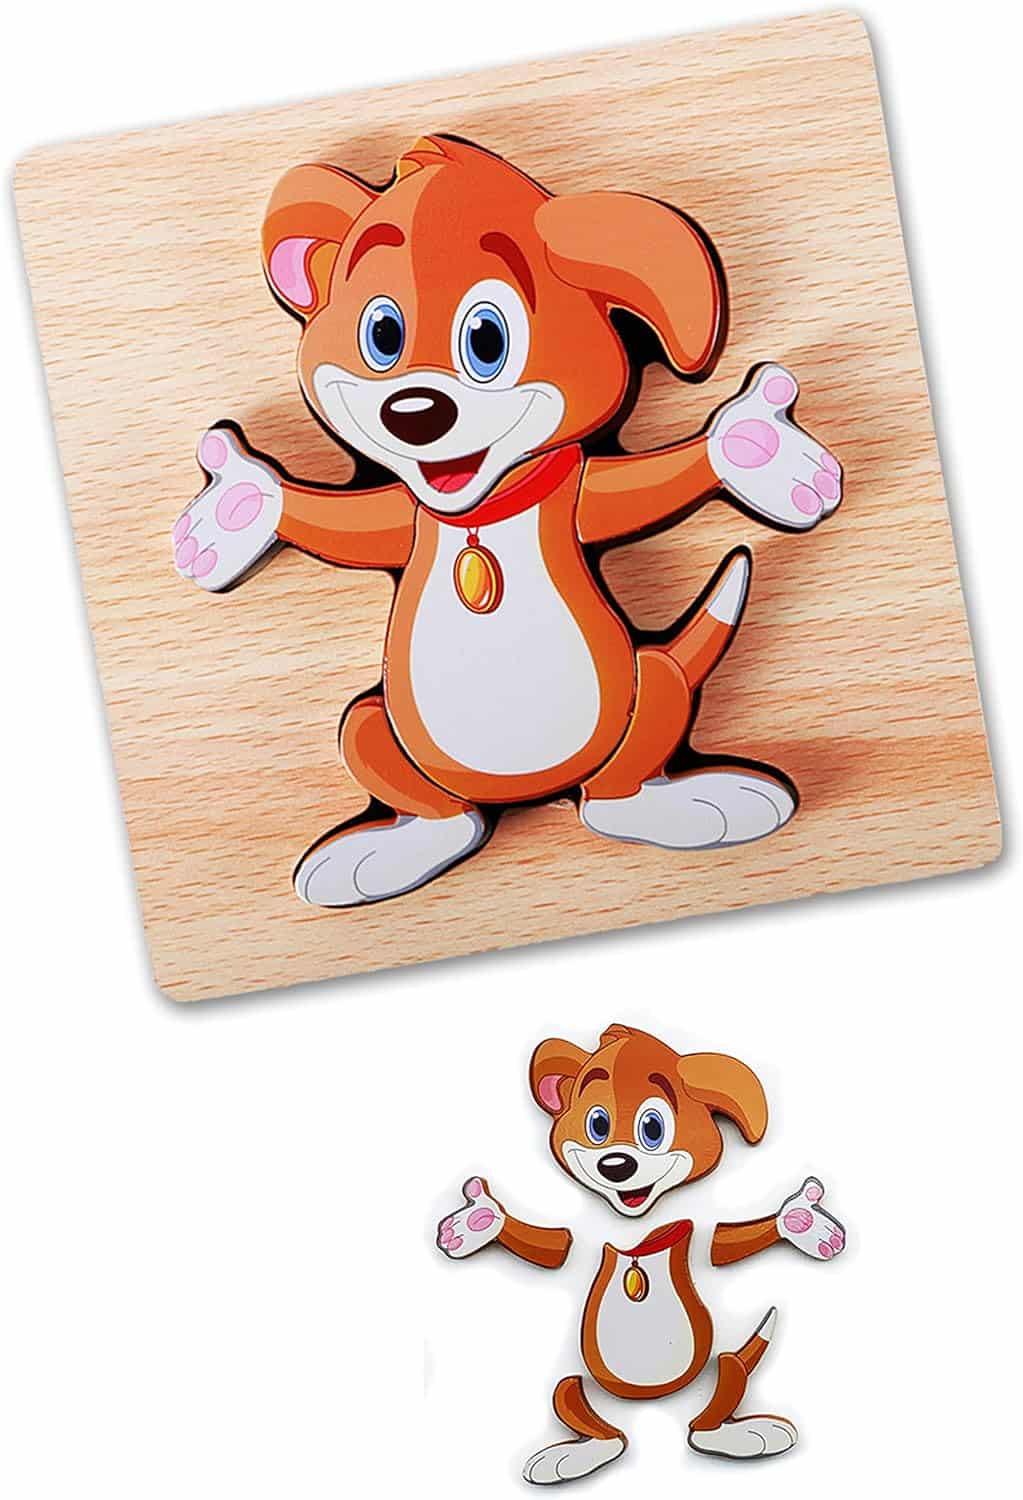 Wooden Educational Jigsaw Toddler Puzzles - Toddler Preschool Game – Kids Learning Toy - Learn Color & Shapes - Driddle